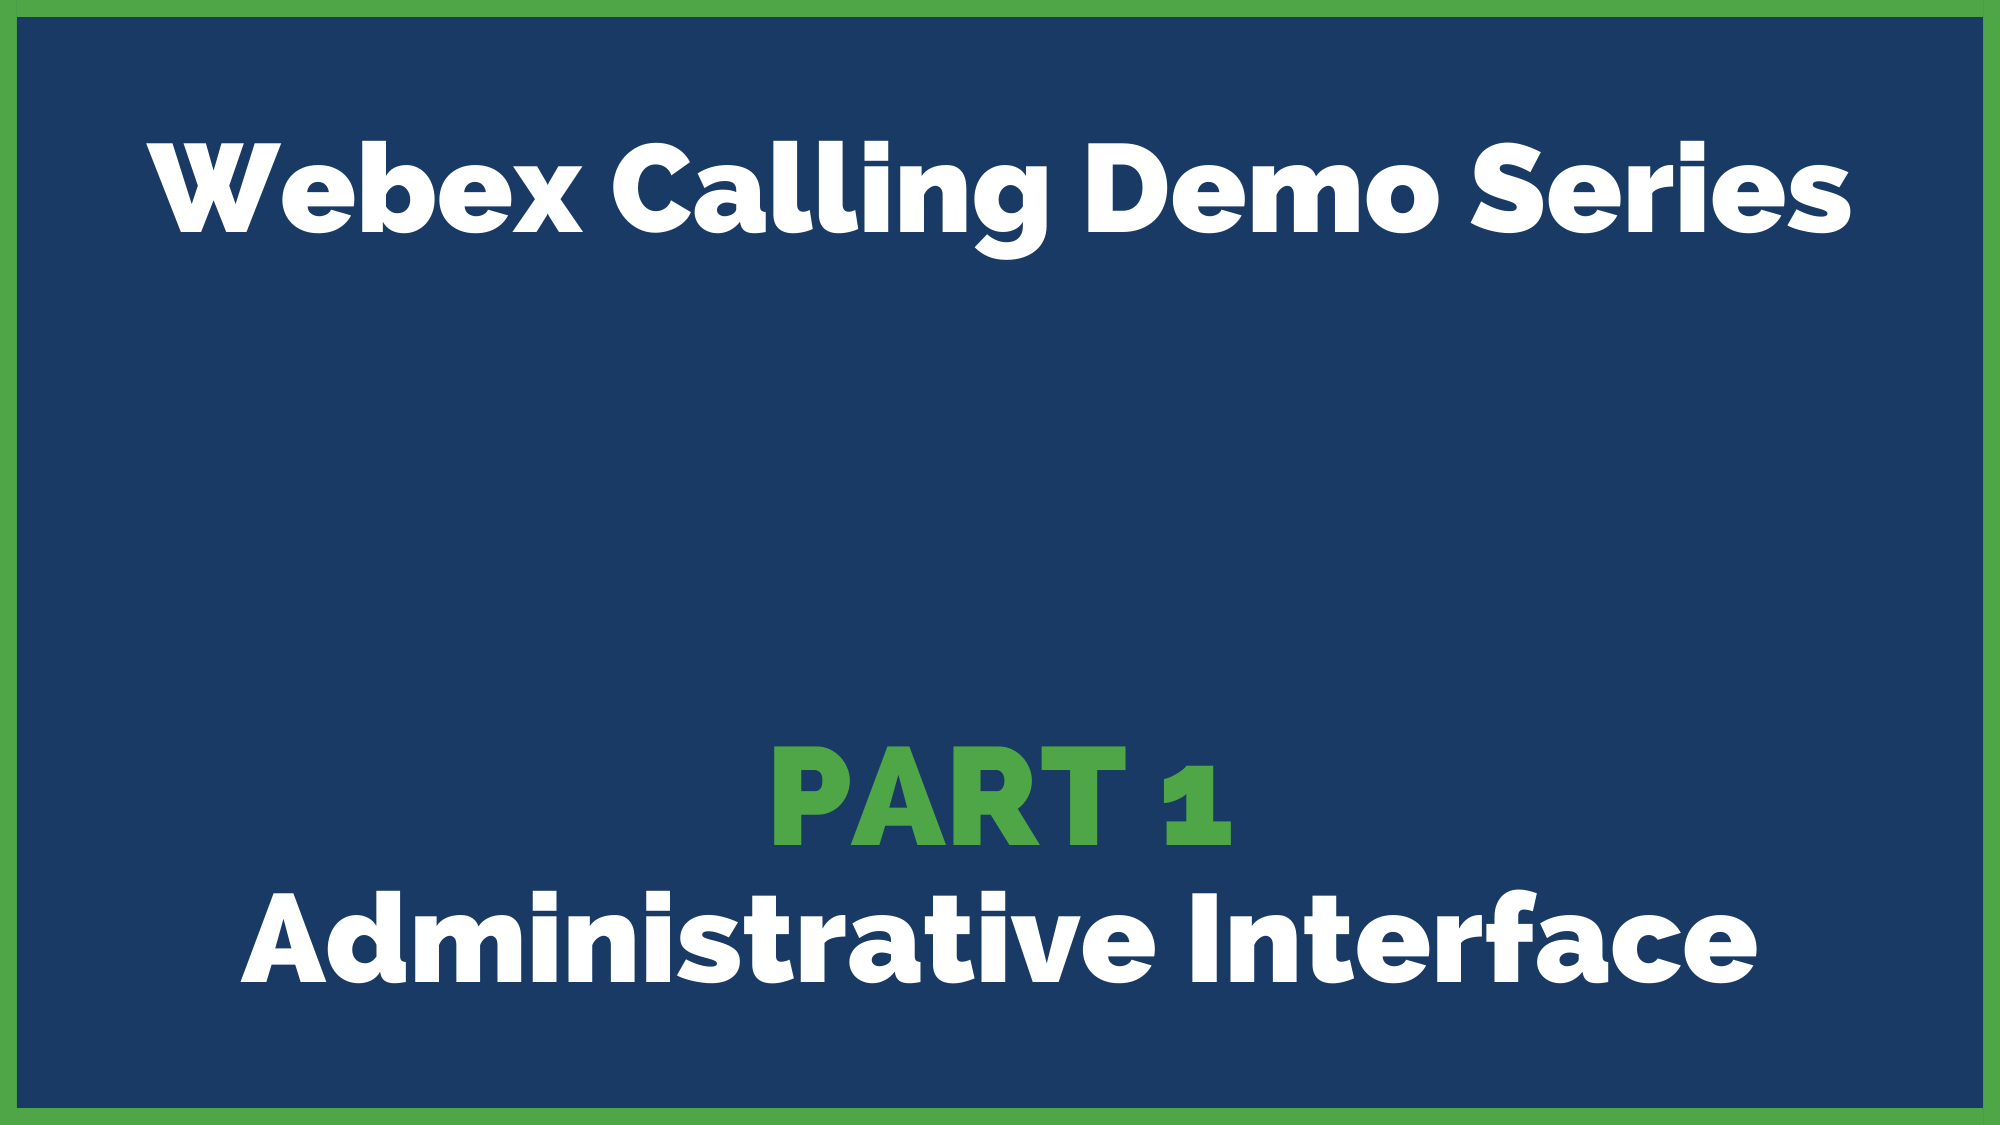 2022 Webex Calling Demo Series Part 1 - Administrative Interface